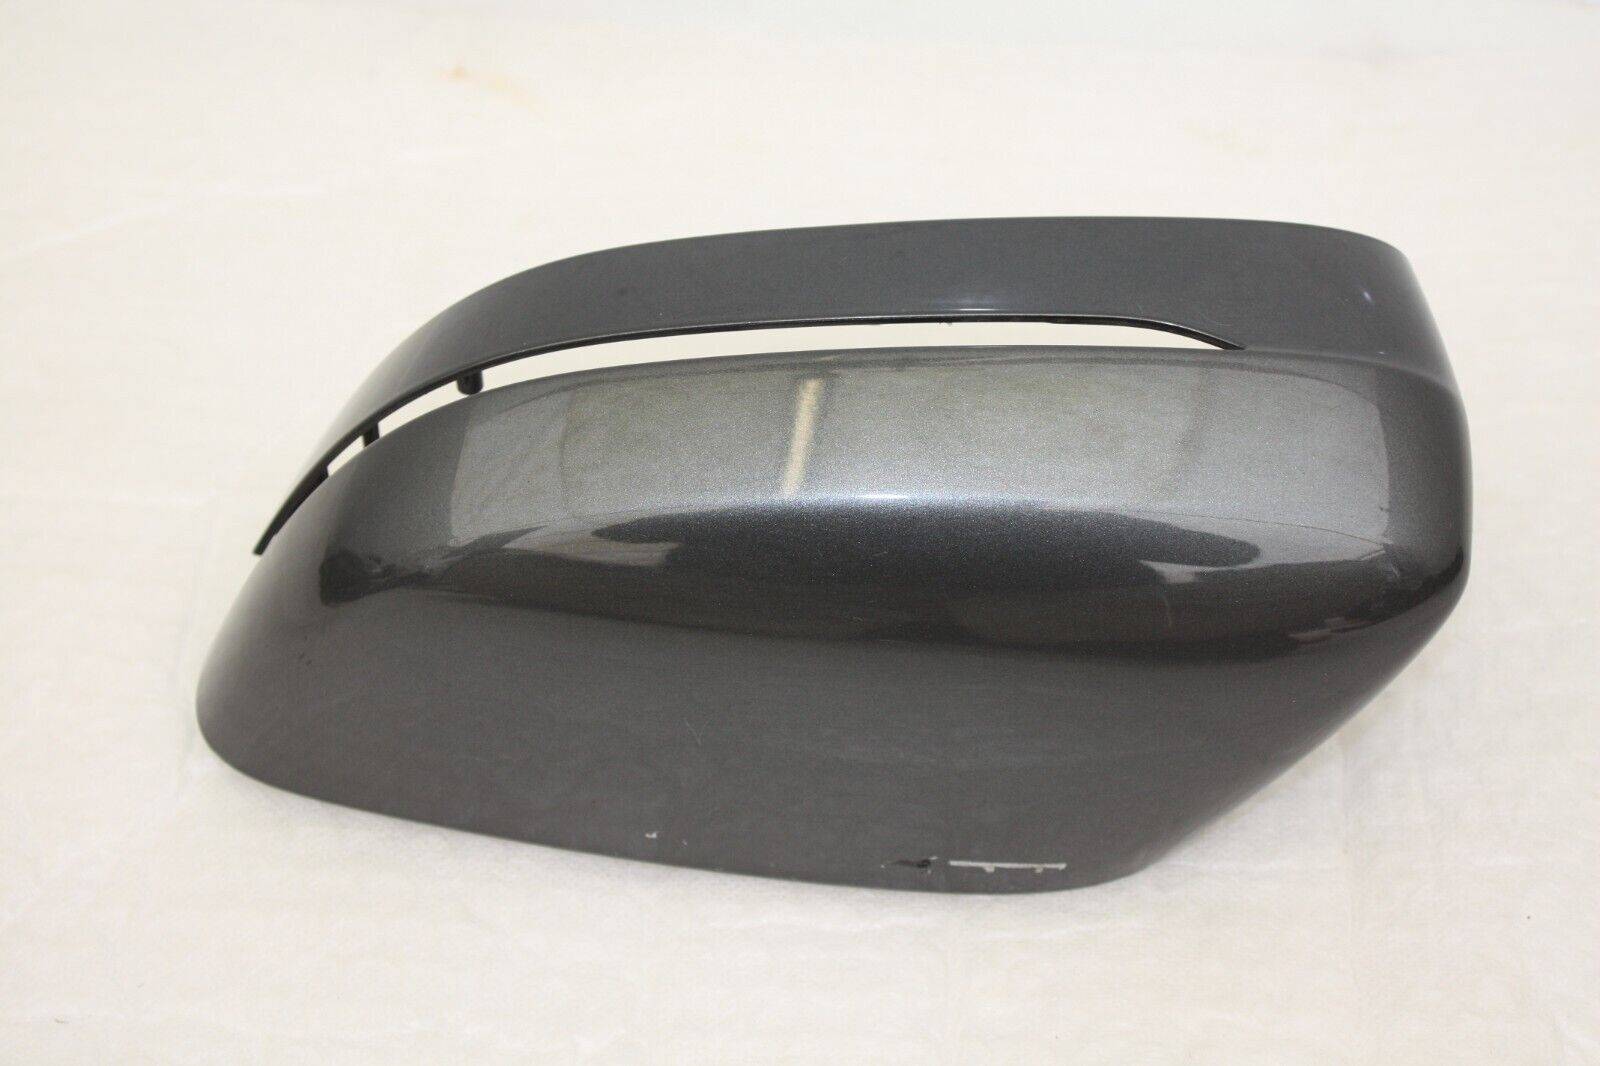 BMW-3-Series-G20-G21-Left-Mirror-Cover-Cap-2019-TO-2023-22416273-Genuine-176344088889